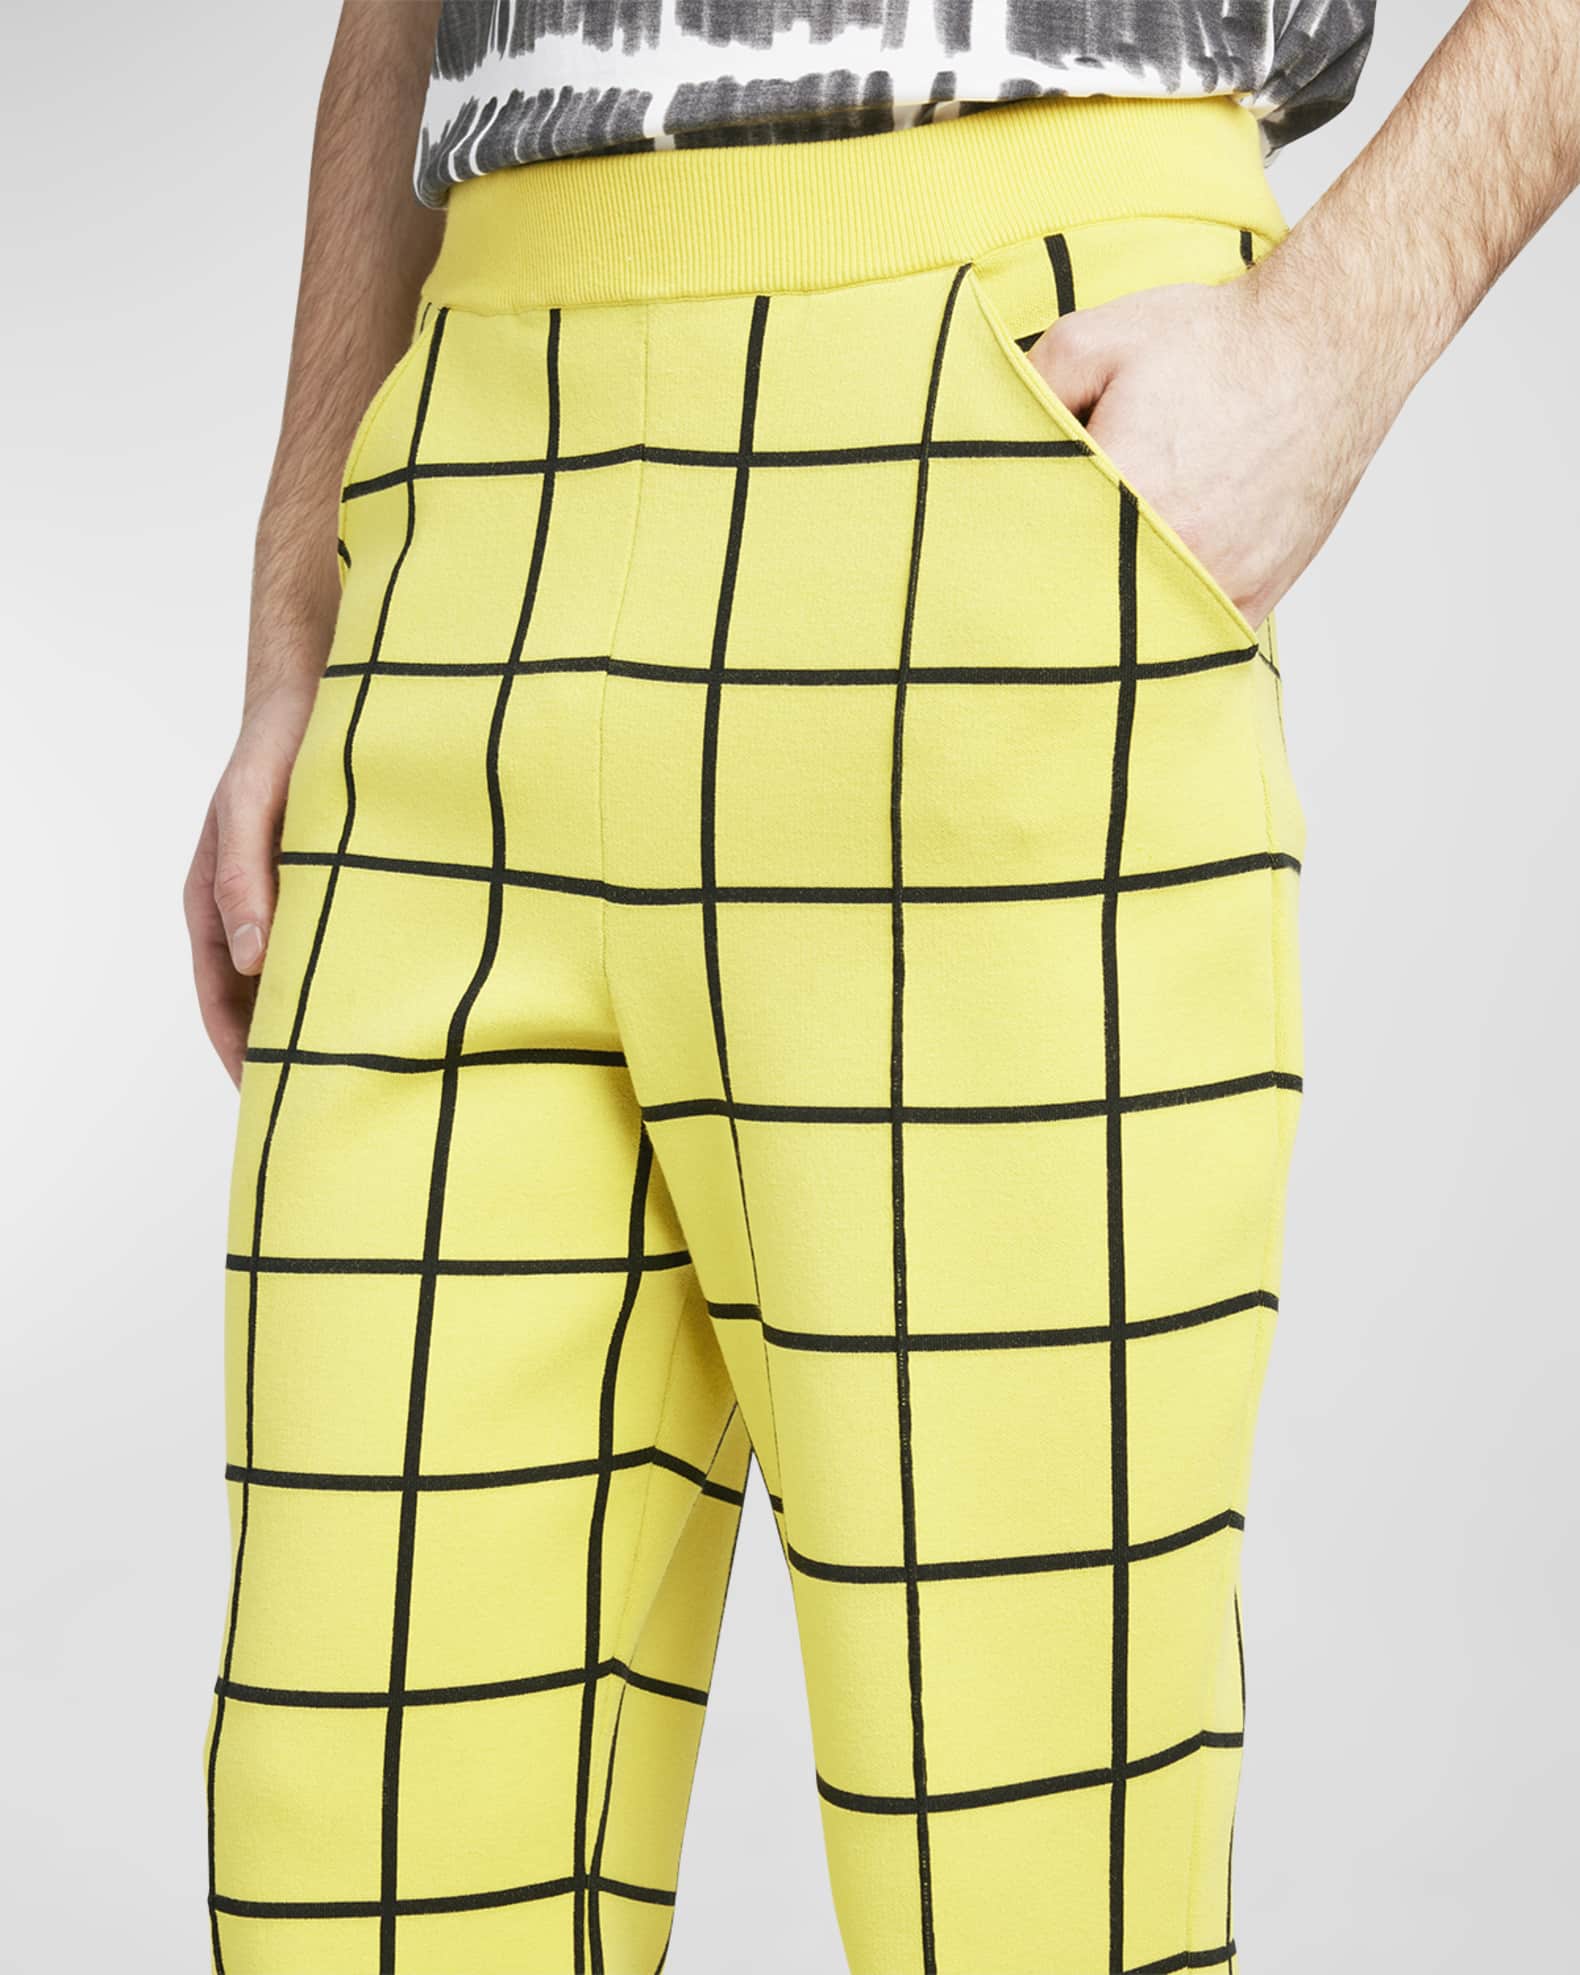 Givenchy plaid-pattern panelled carpenter jeans - Yellow